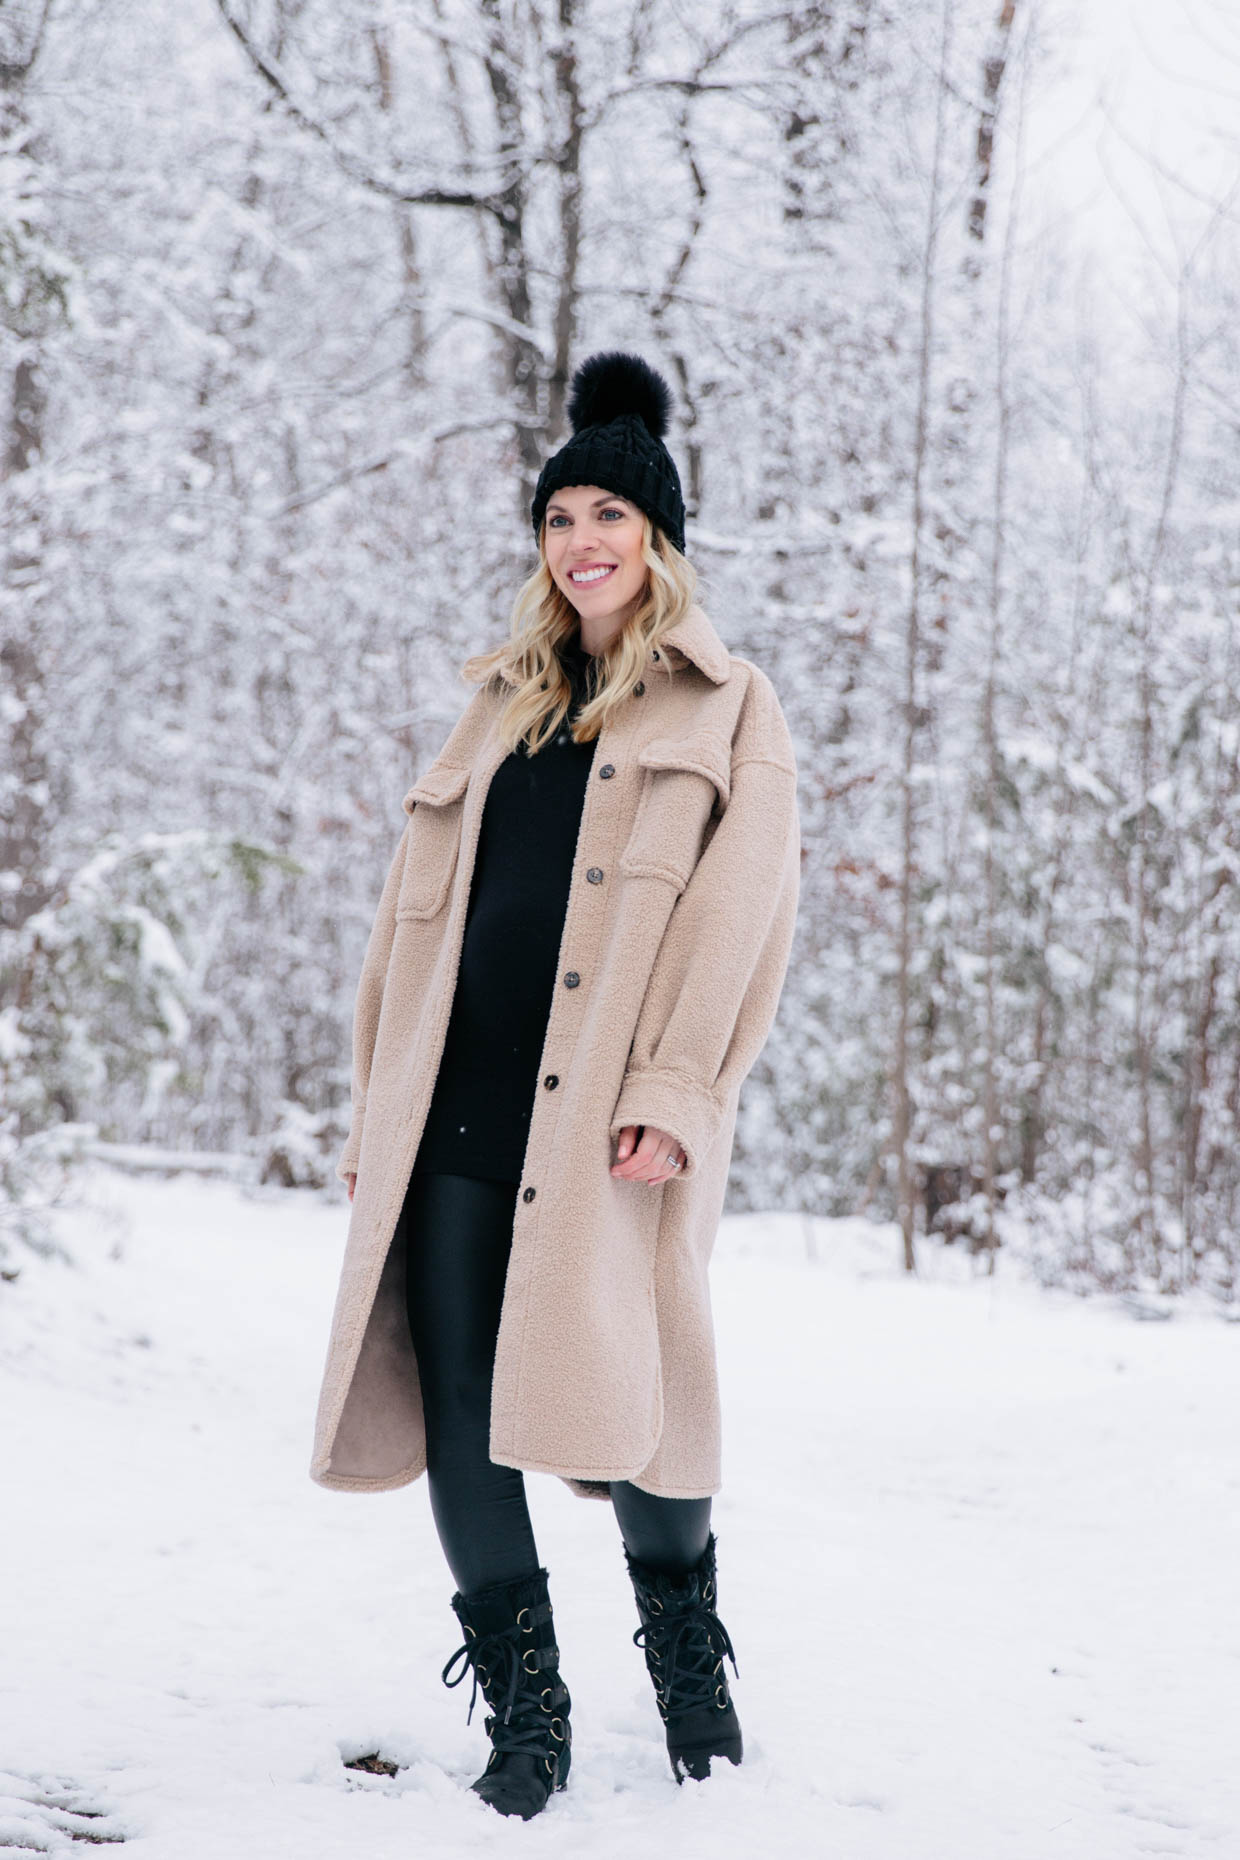 Winter Outfit Inspiration: Snowy Day Style